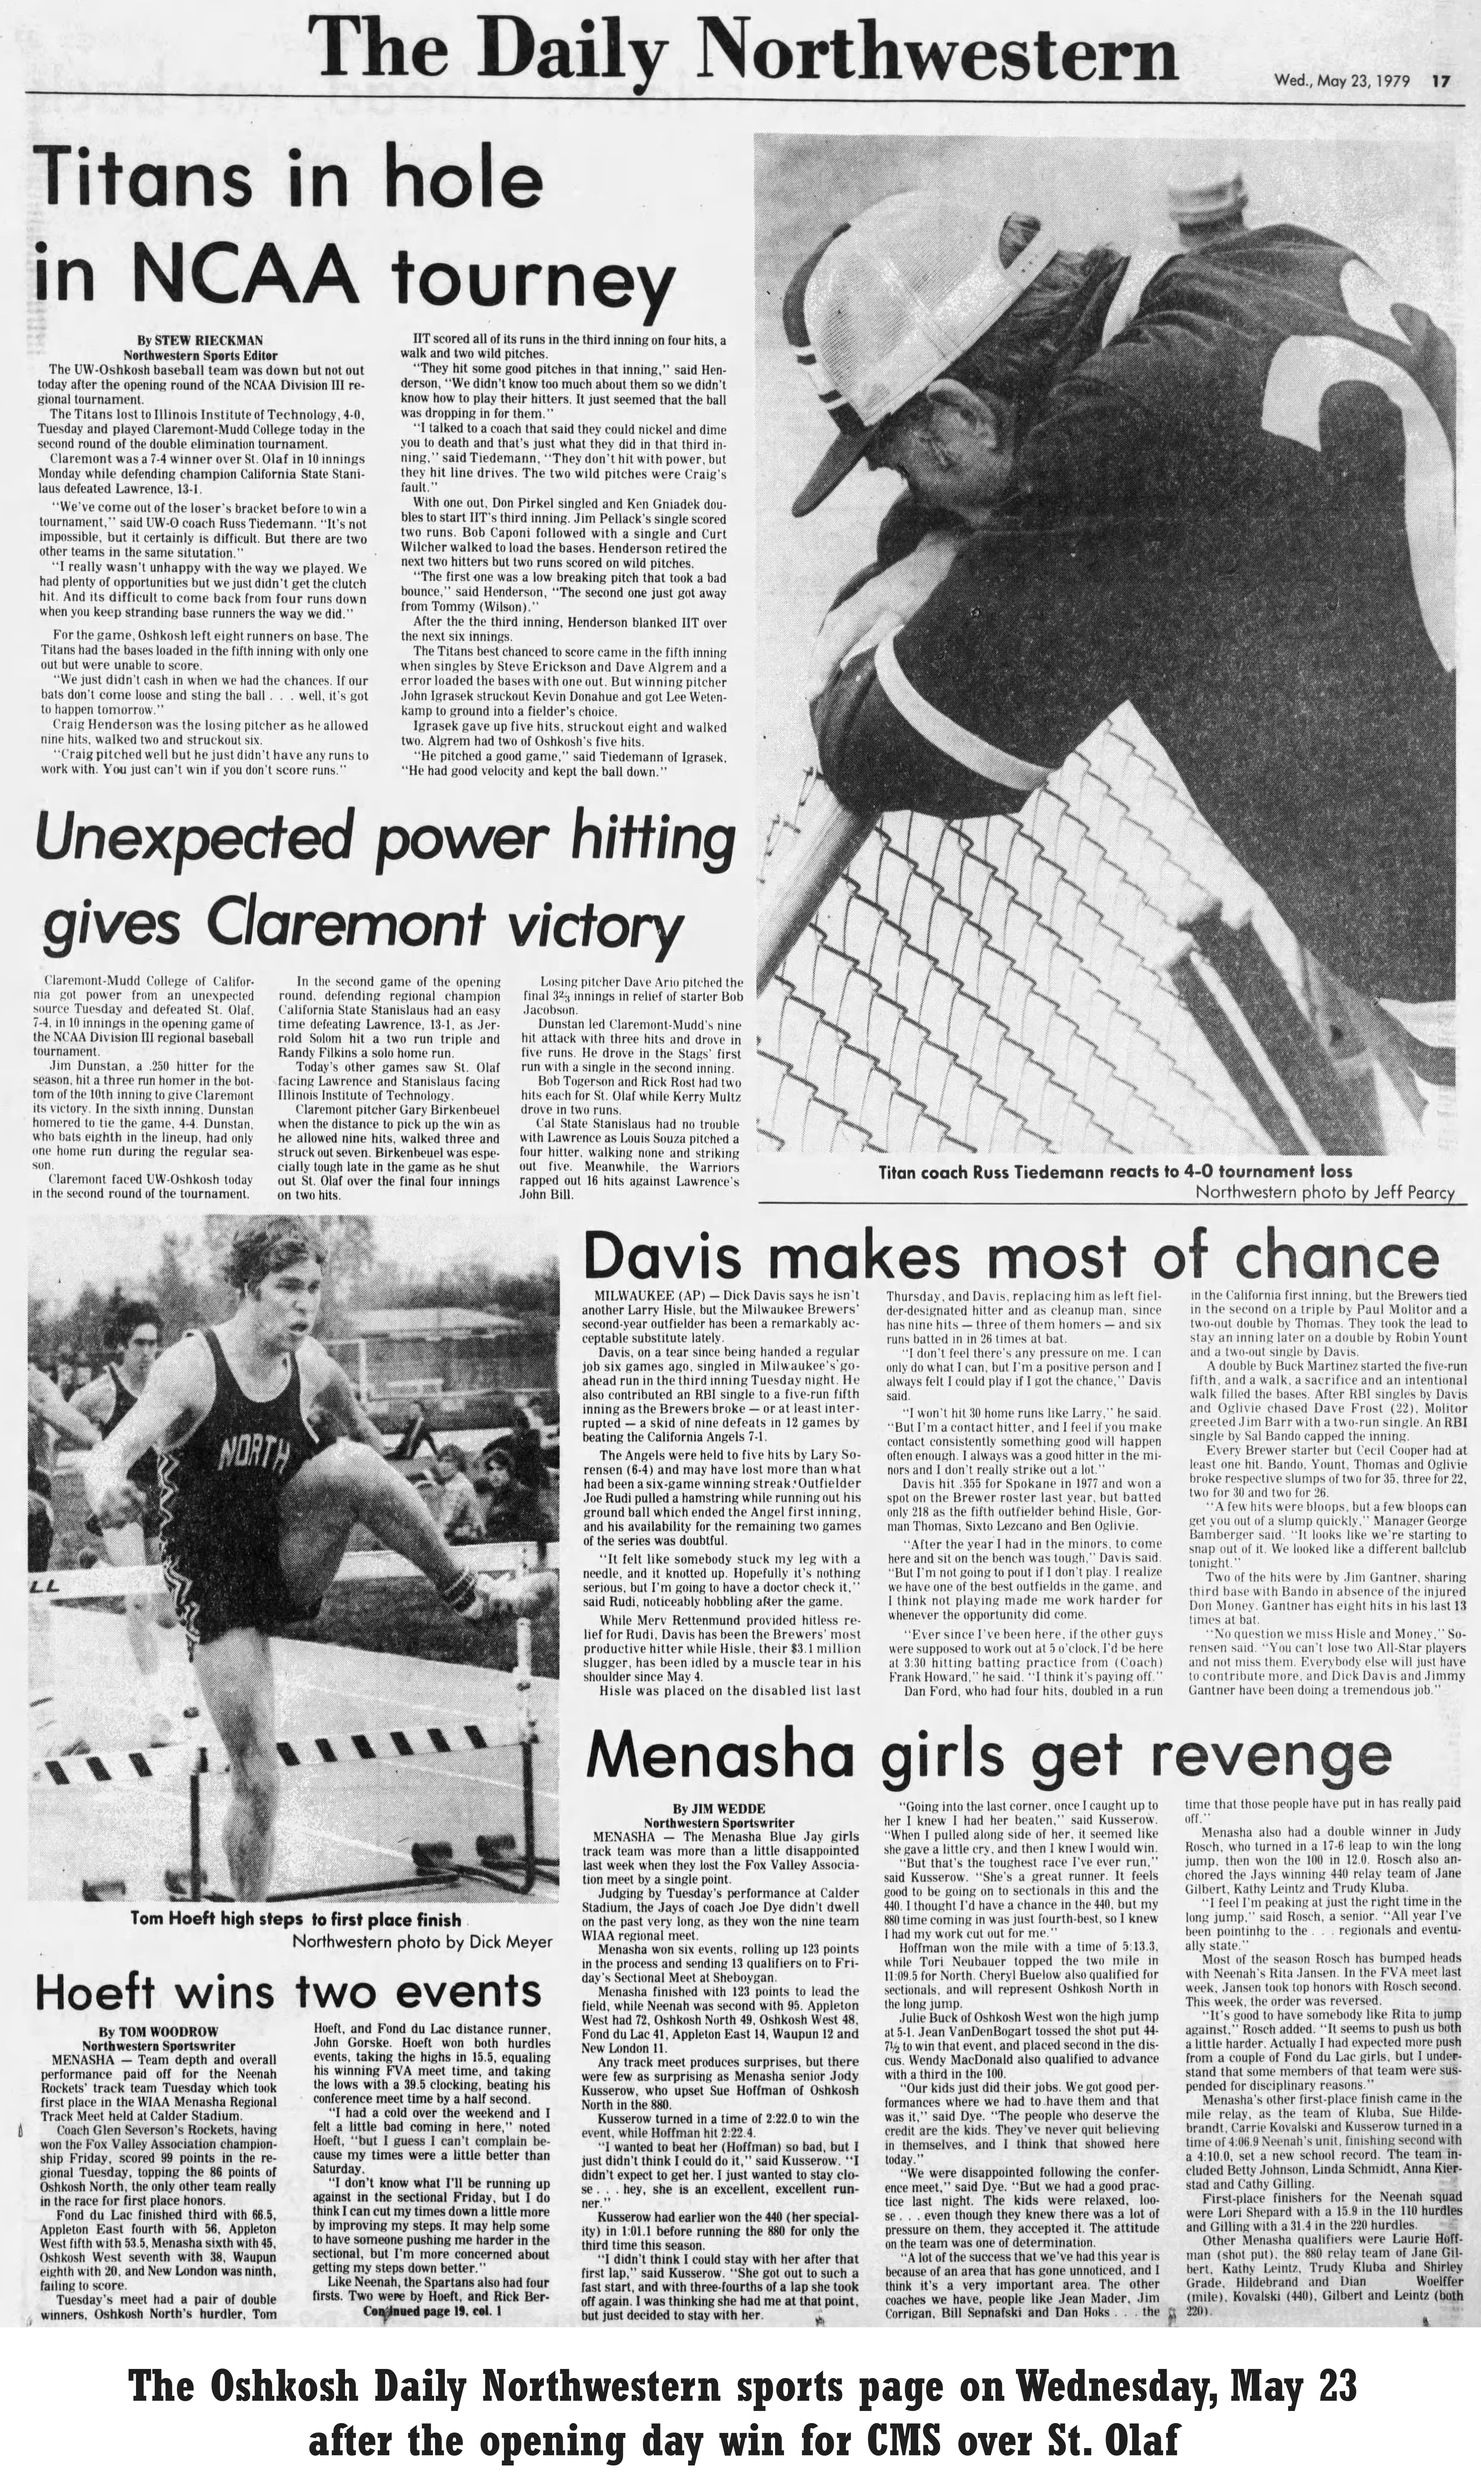 The front page of the sports section on May 23, 1979 with a headline that reads "Unexpected power hitting gives Claremont victory" (newspaper is for decorative purposes)